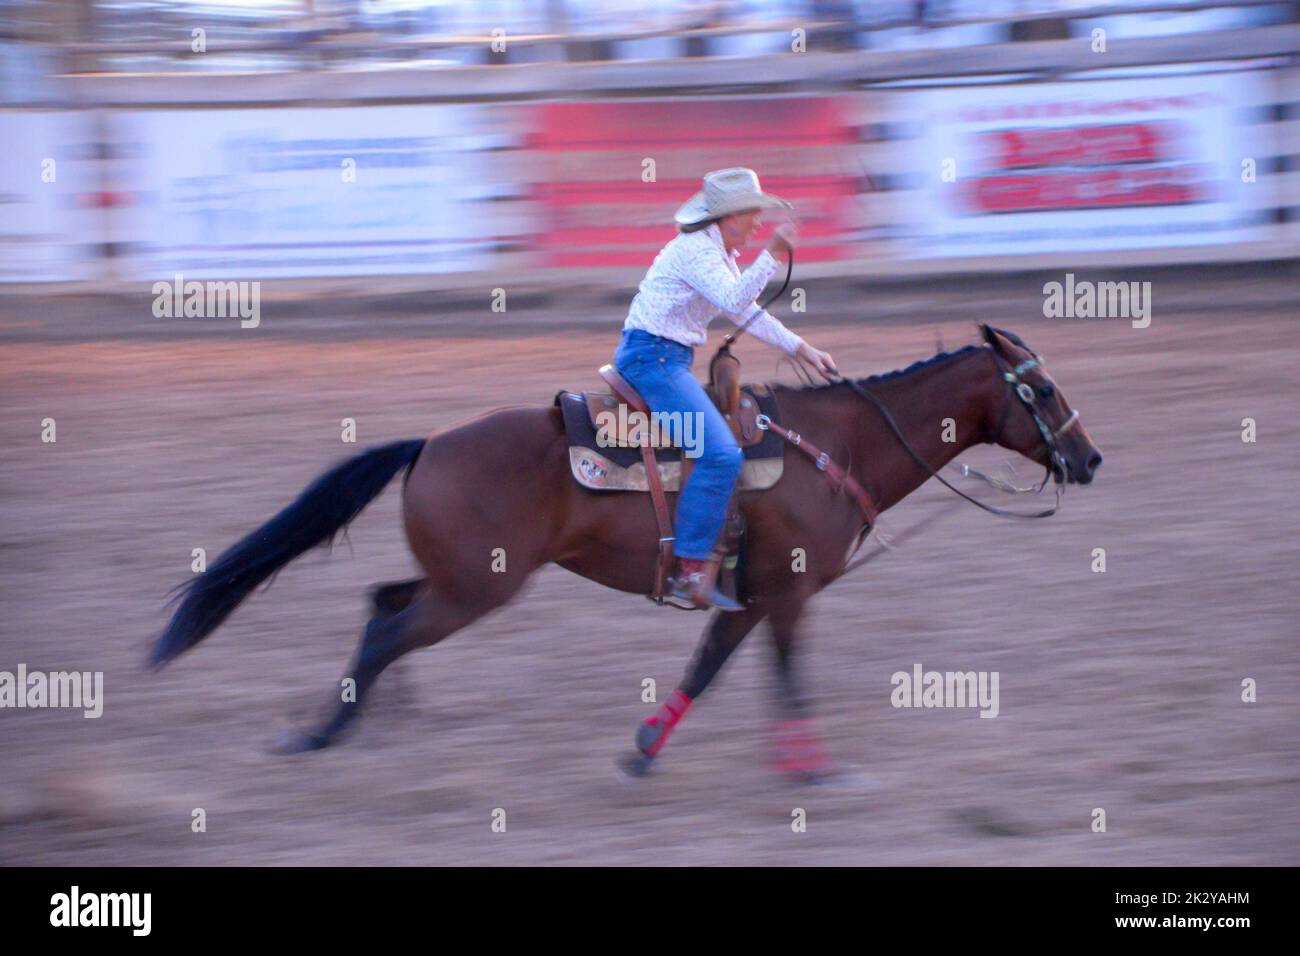 A cowgirl gallops at full speed in the barrel racing event of a Rodeo in Colorado Stock Photo